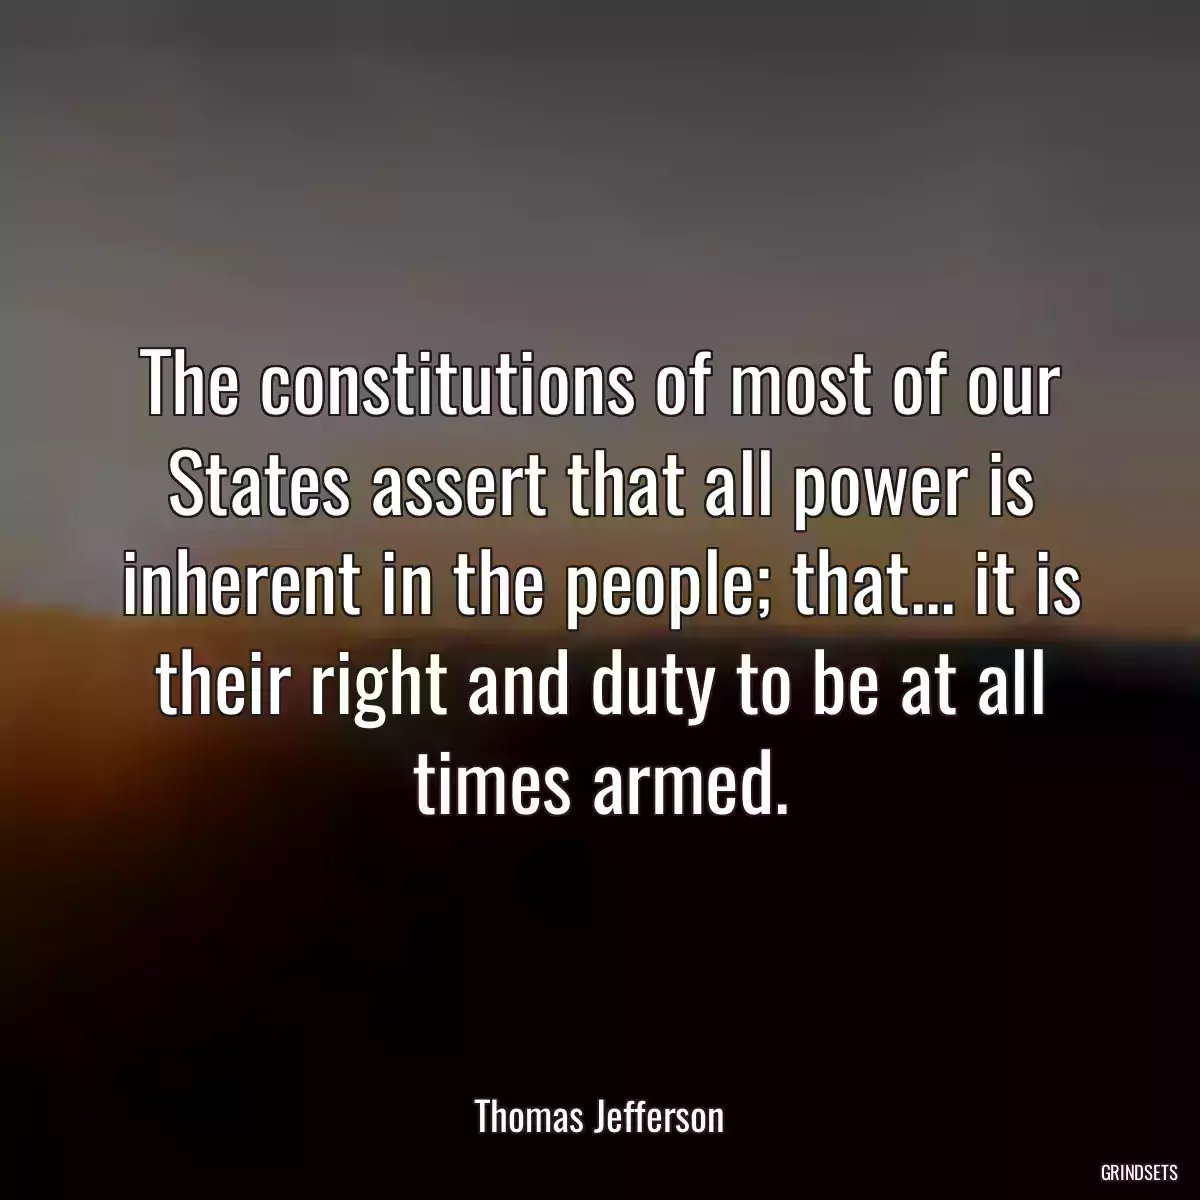 The constitutions of most of our States assert that all power is inherent in the people; that... it is their right and duty to be at all times armed.